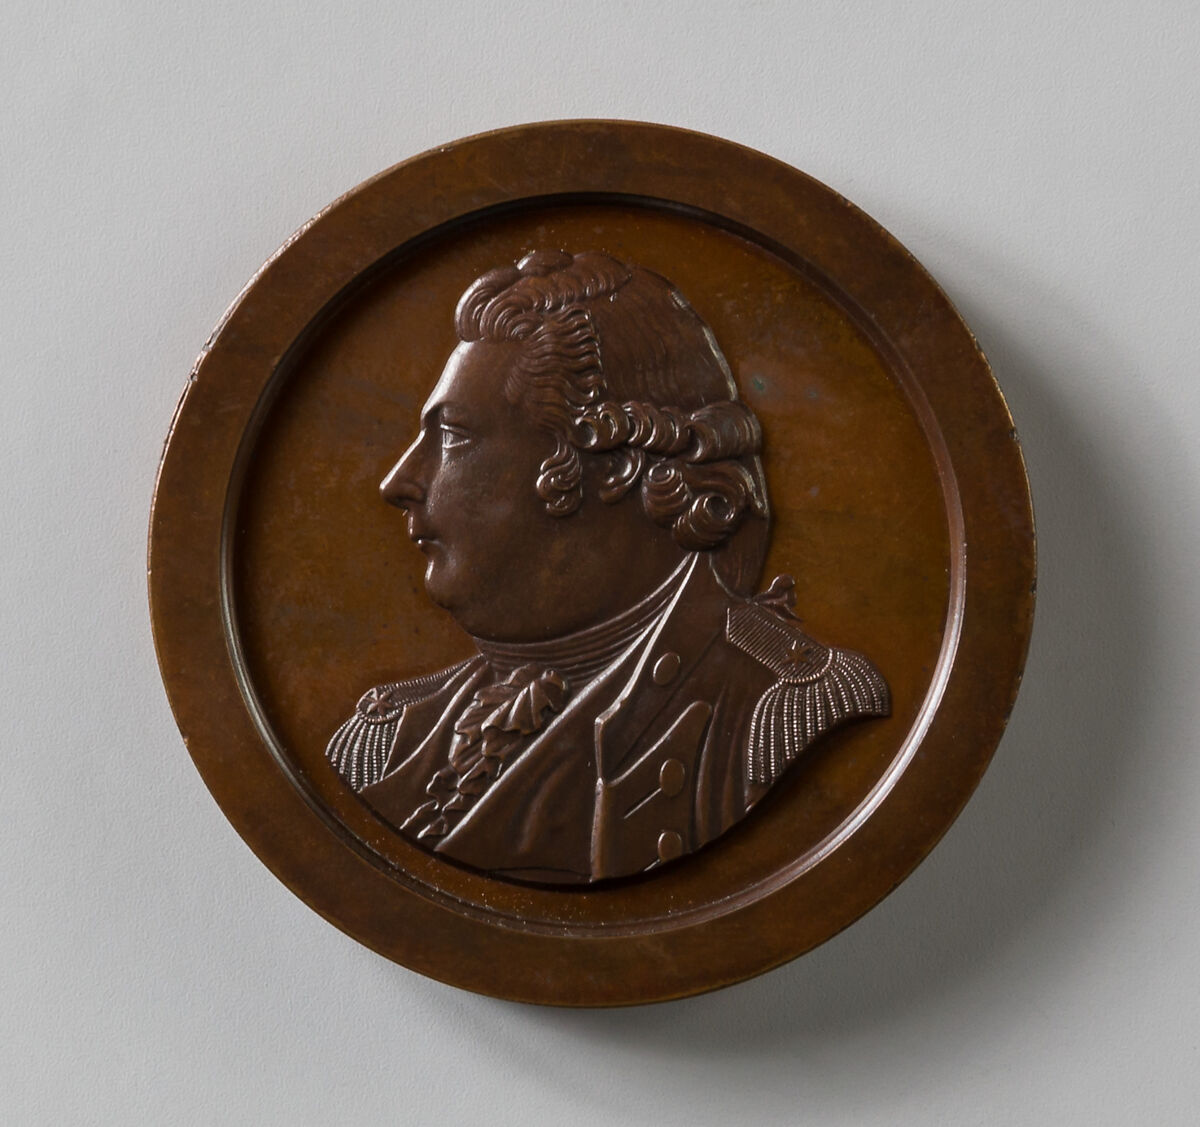 Medal of Captain Truxtun's Engagement with a French Cruiser in 1800, Moritz Fürst (born 1782, active United States, 1807–ca. 1840), Bronze, American 